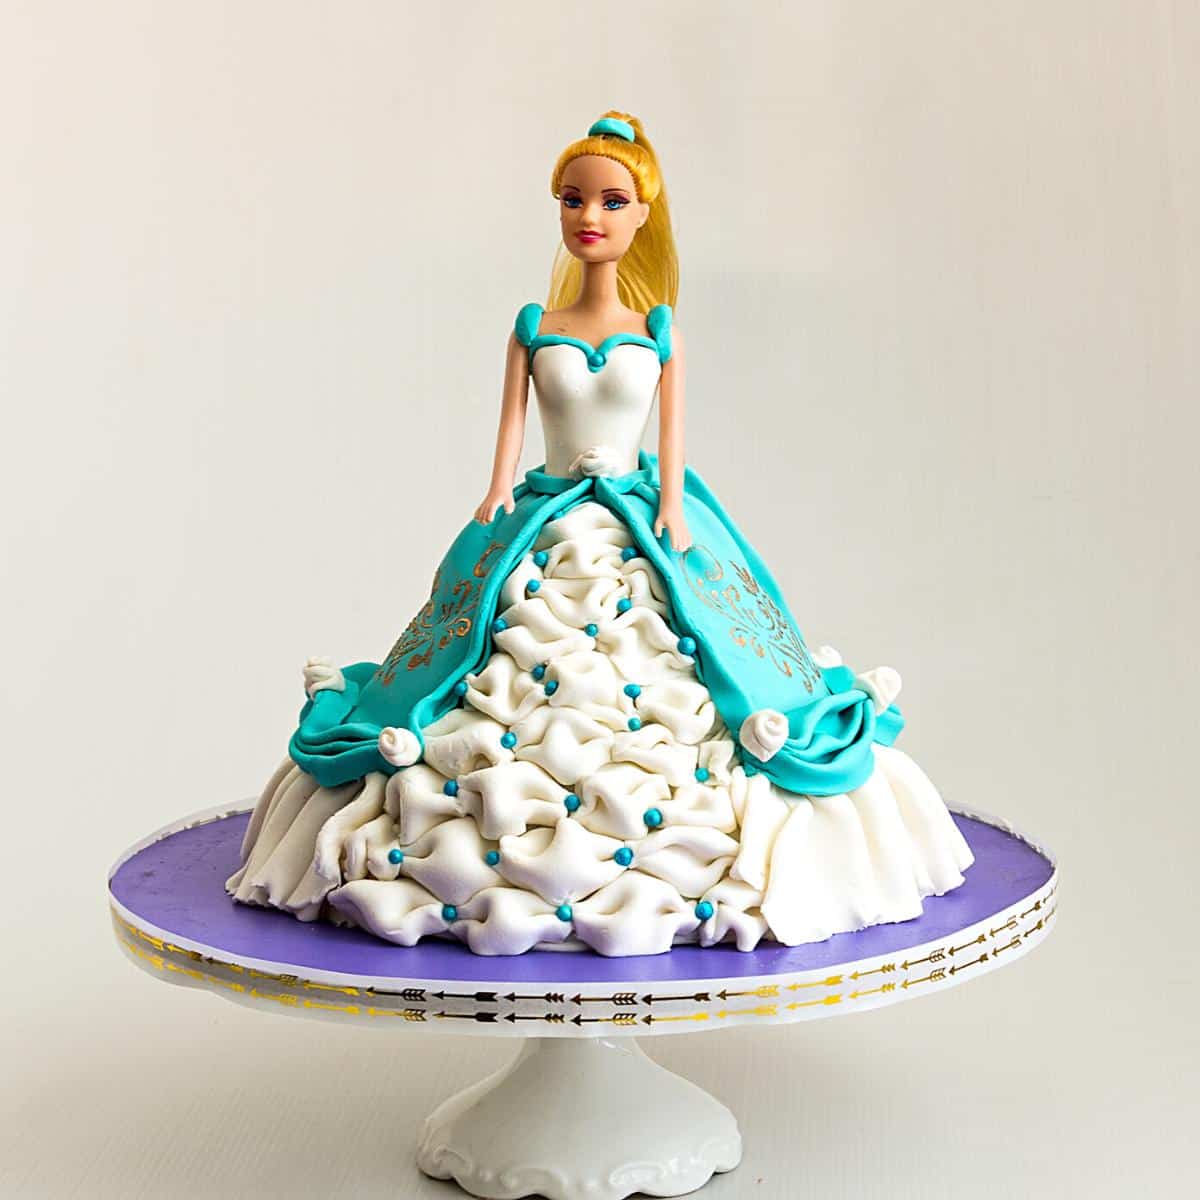 A doll cake on the cake board.